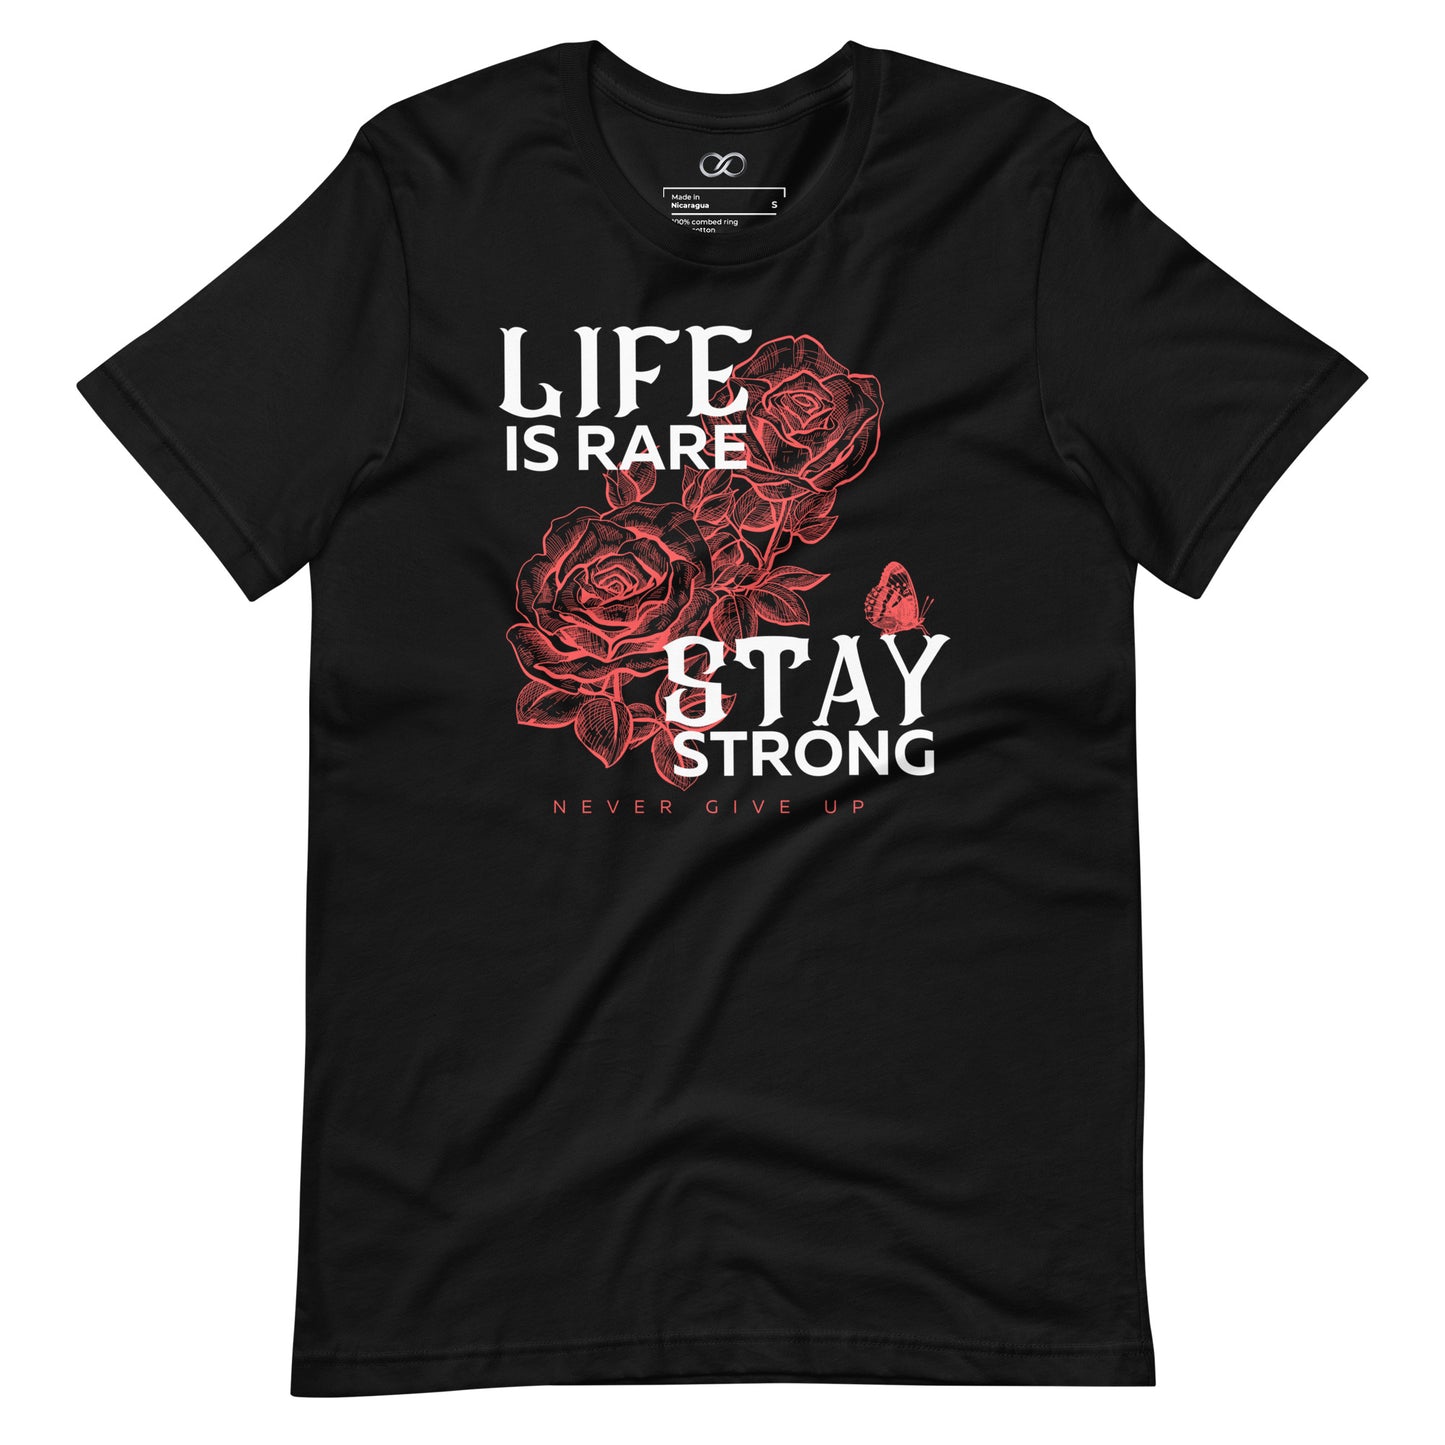 Black 'Stay Strong' motivational quote t-shirt with red roses, symbolizing strength and perseverance.